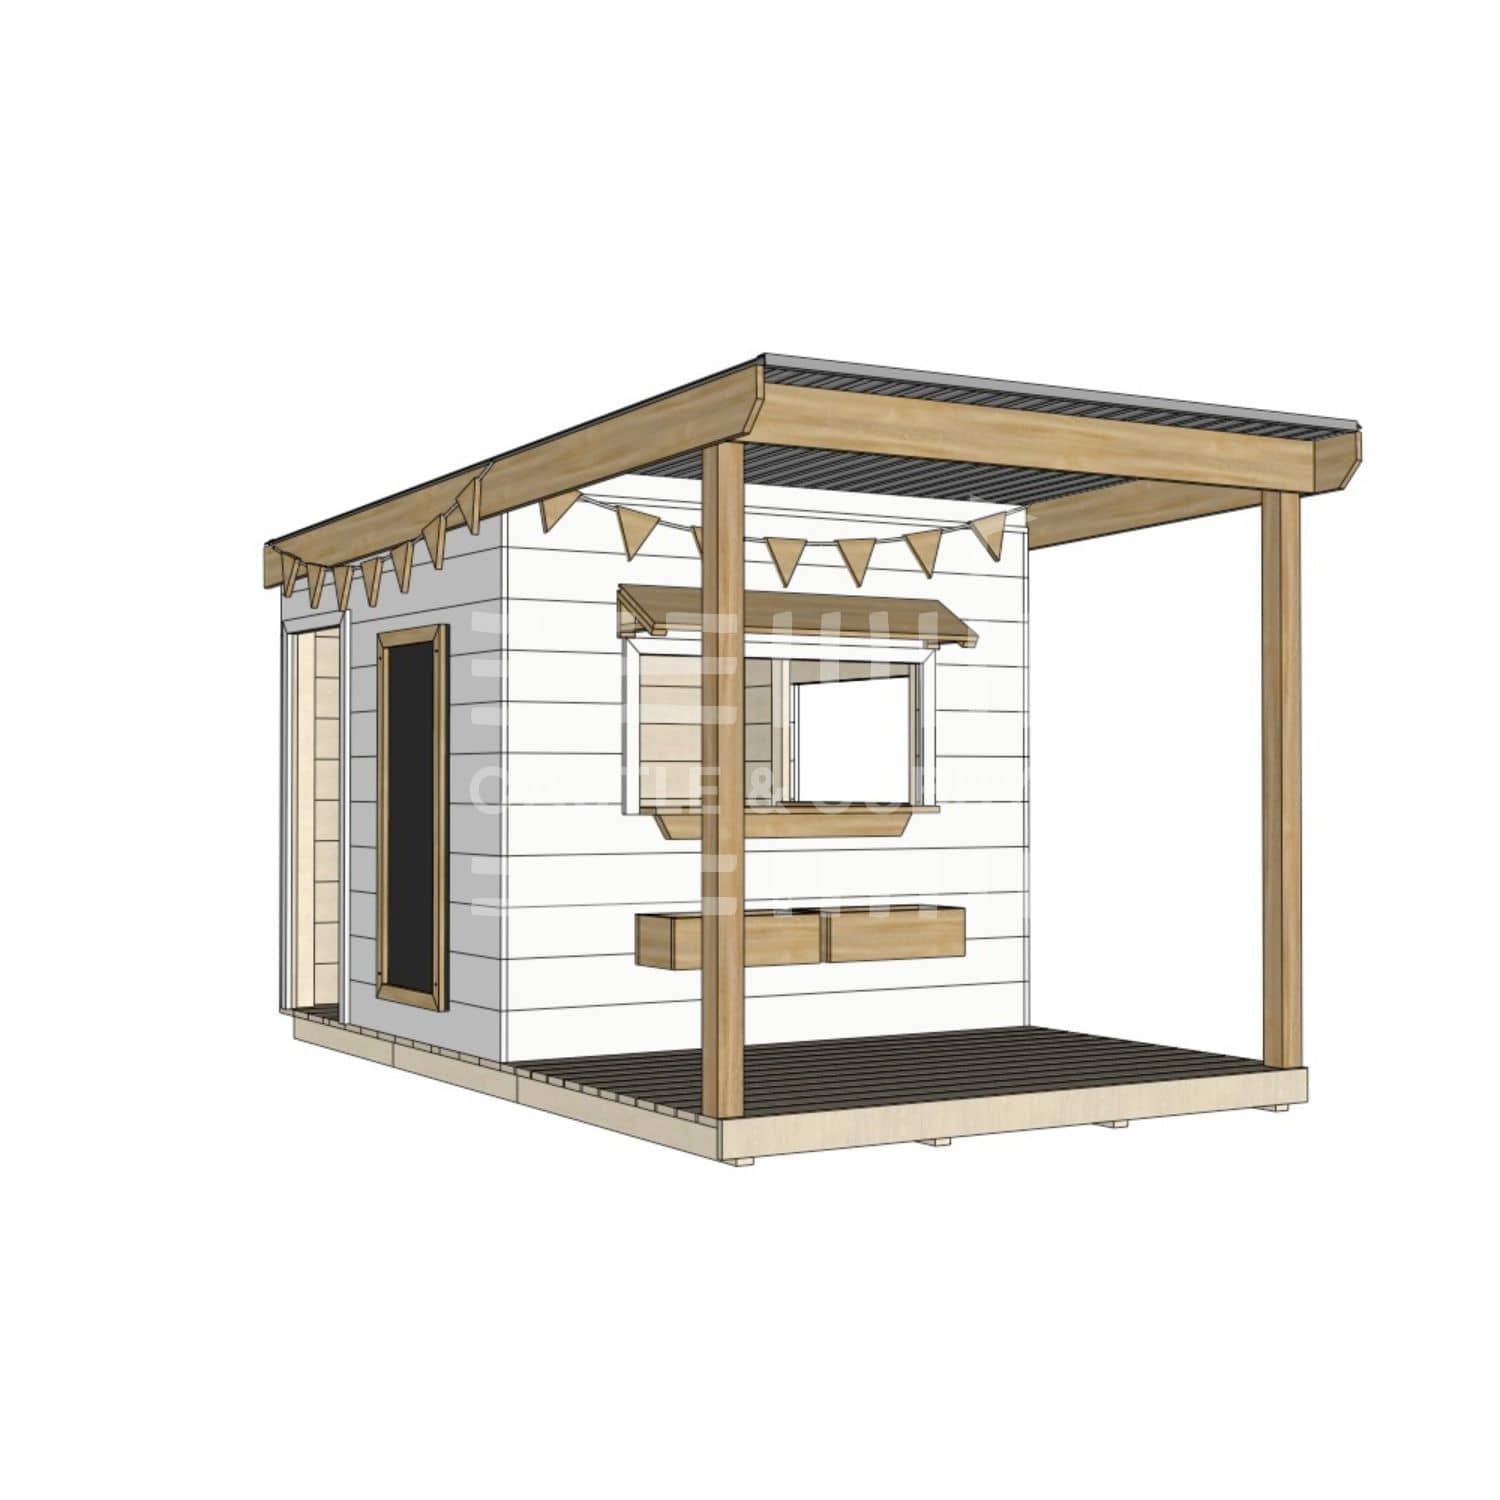 A commercial grade painted wooden midi square cubby house with front verandah and accessories